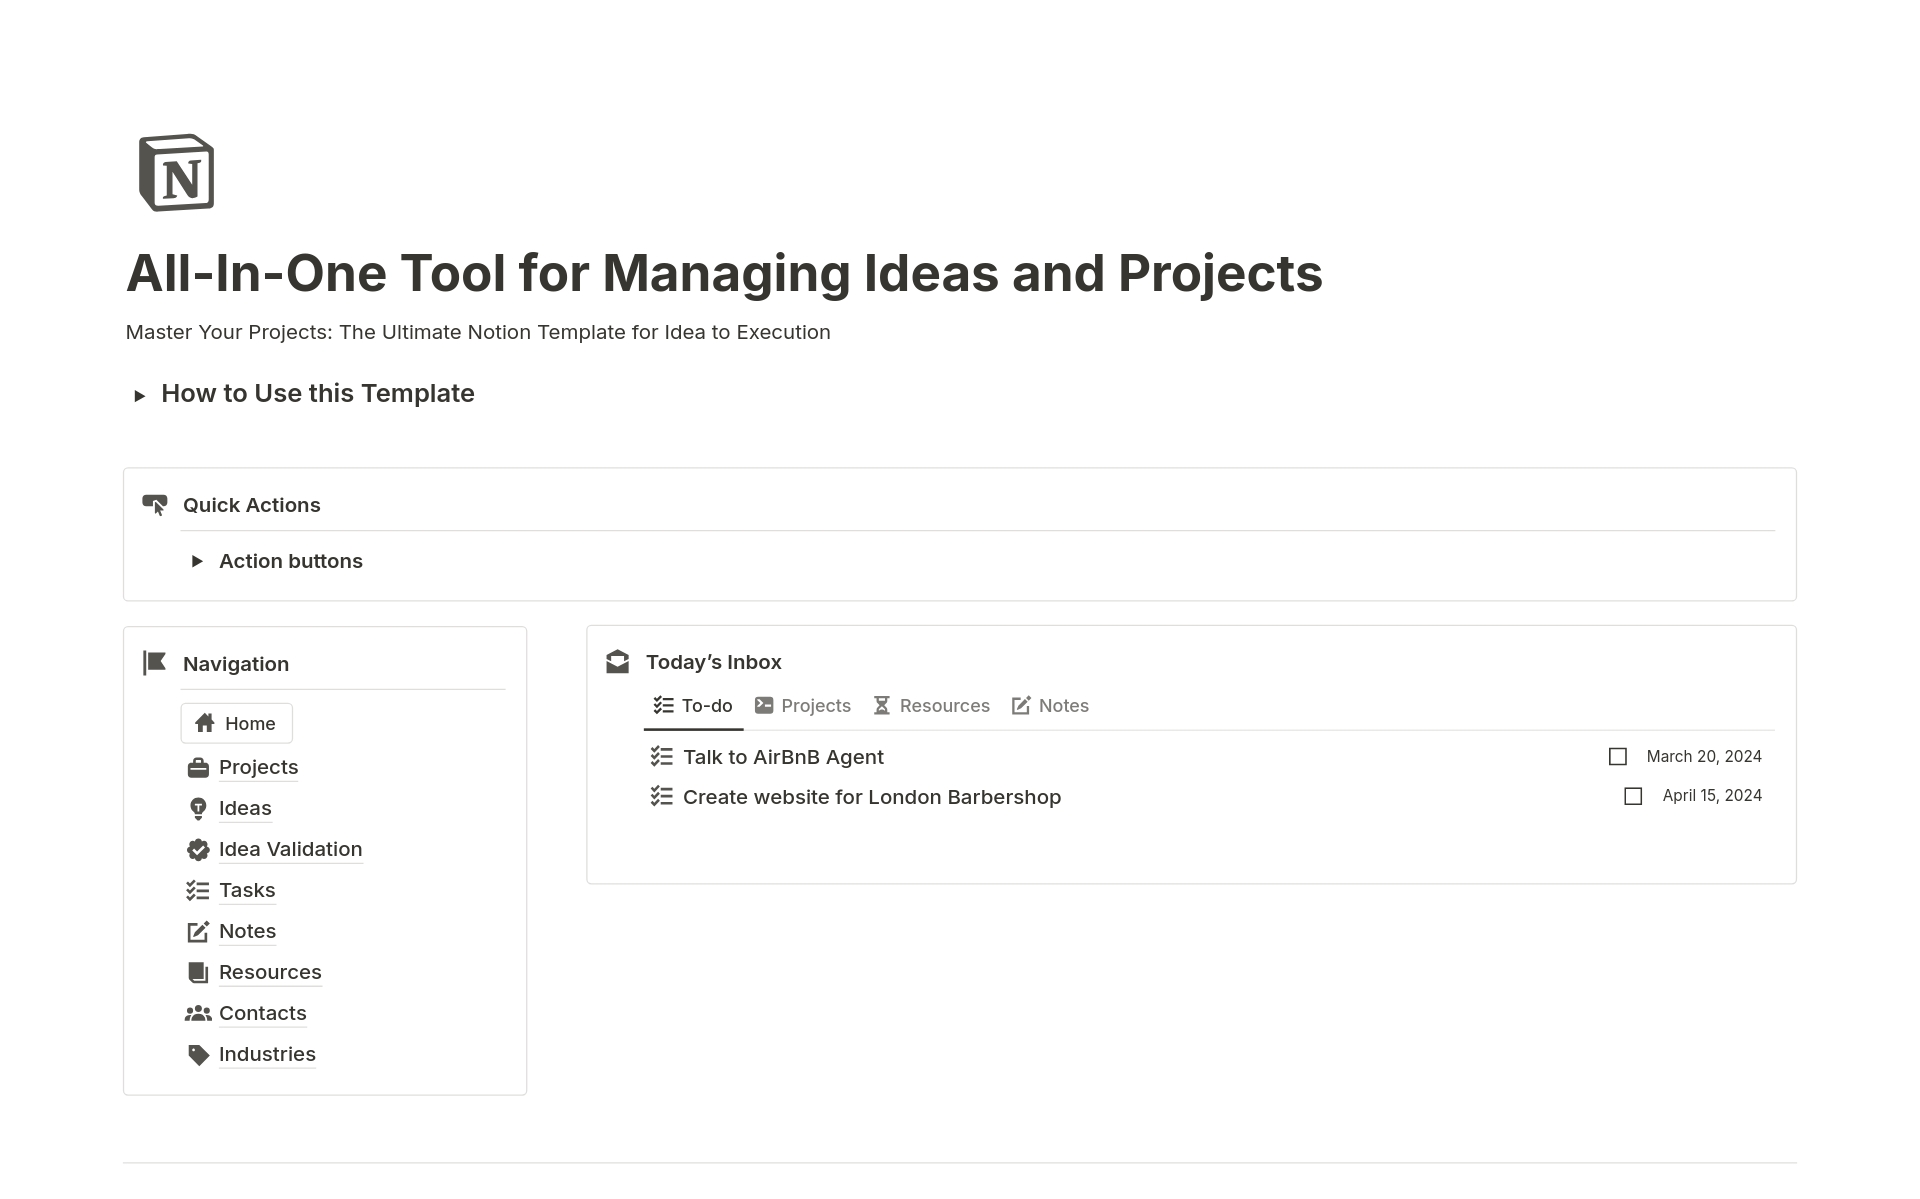 Aperçu du modèle de All-In-One Tool for Managing Ideas and Projects